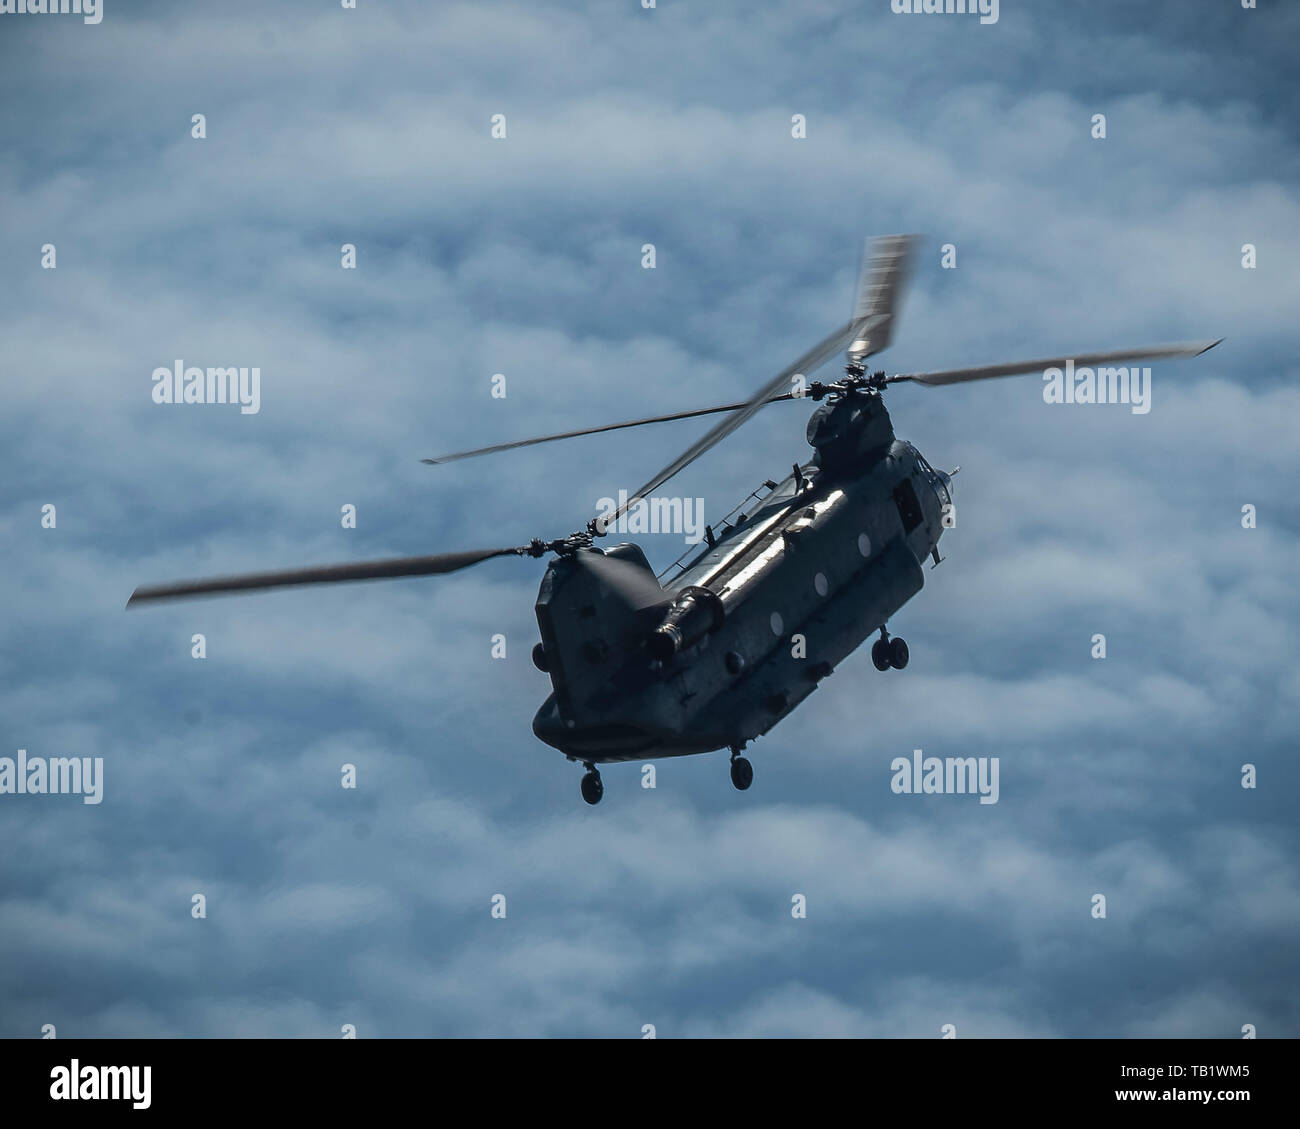 RAF Chinook Helicopter with blurred blades and a cloudy sky Stock Photo